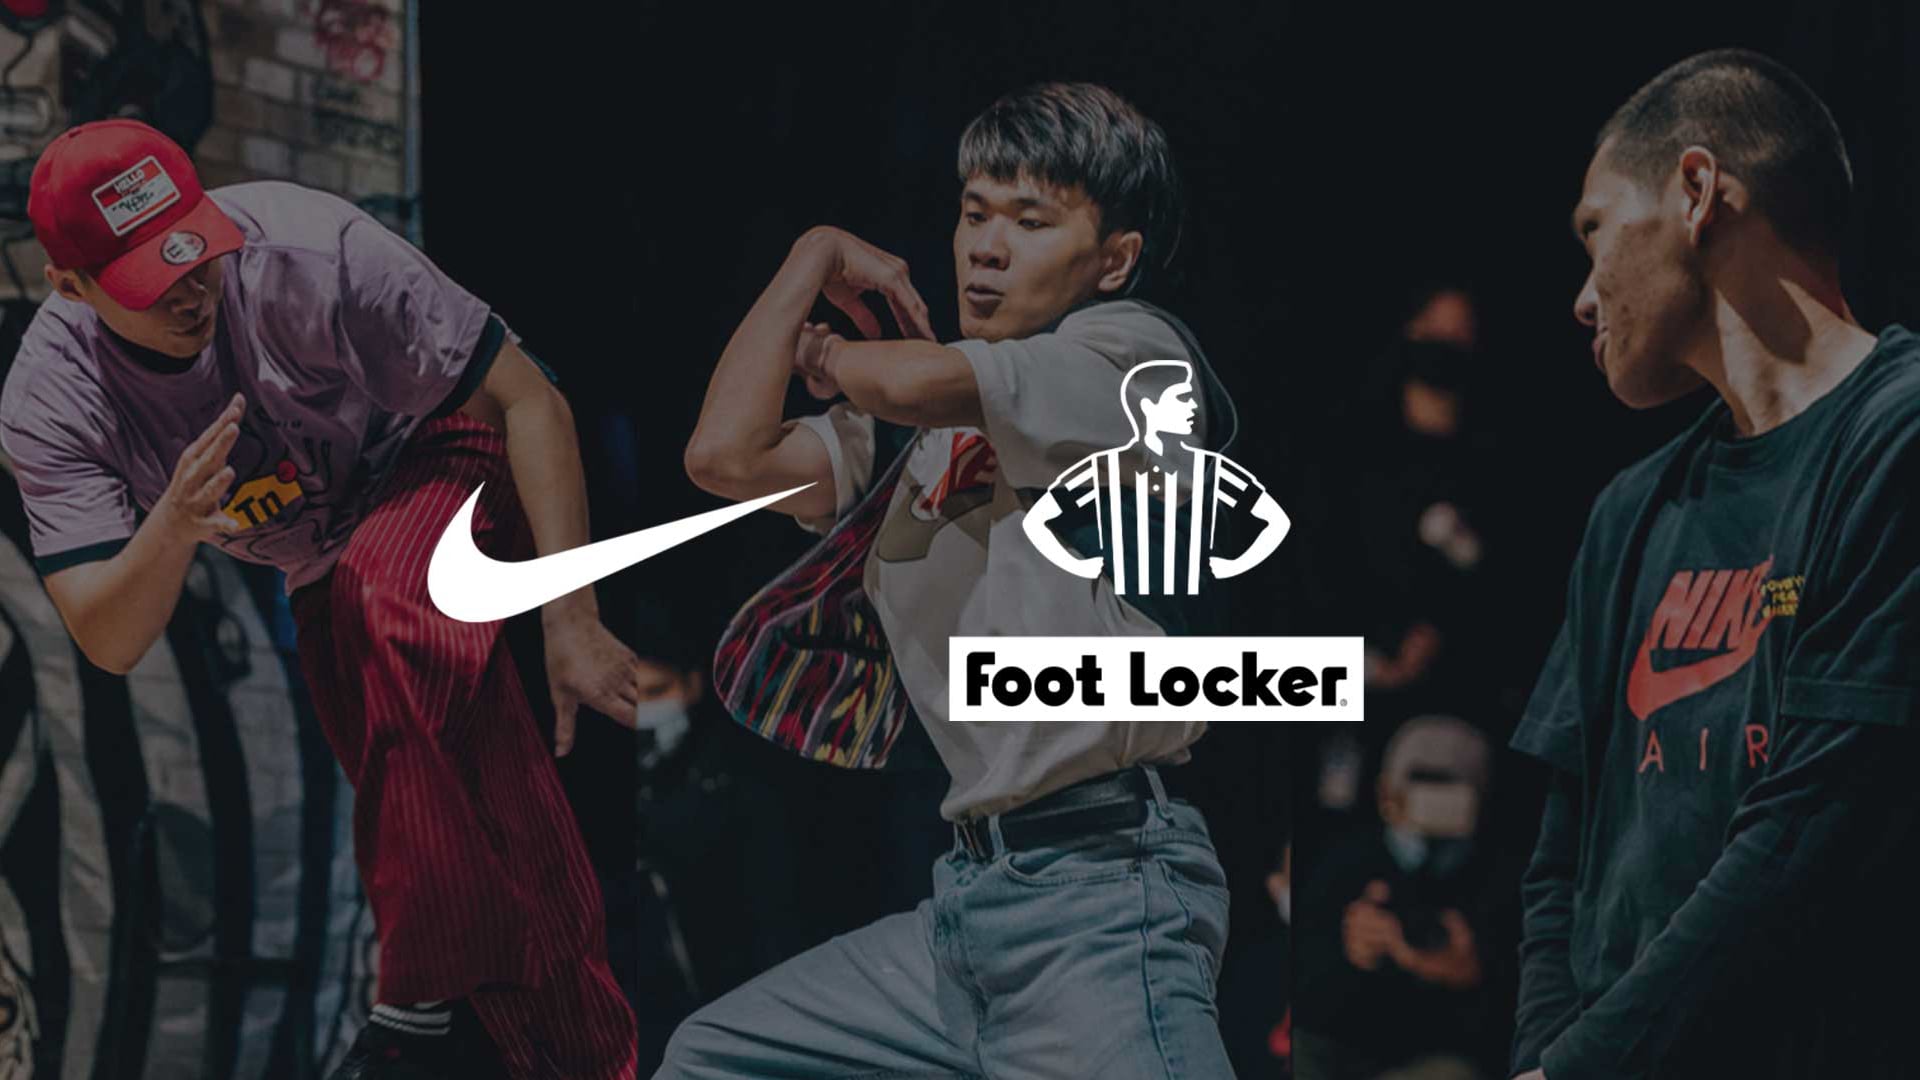 FOOTLOCKER x NIKE CAMPAIGN RECAP - BACK TO THE STREETS SG